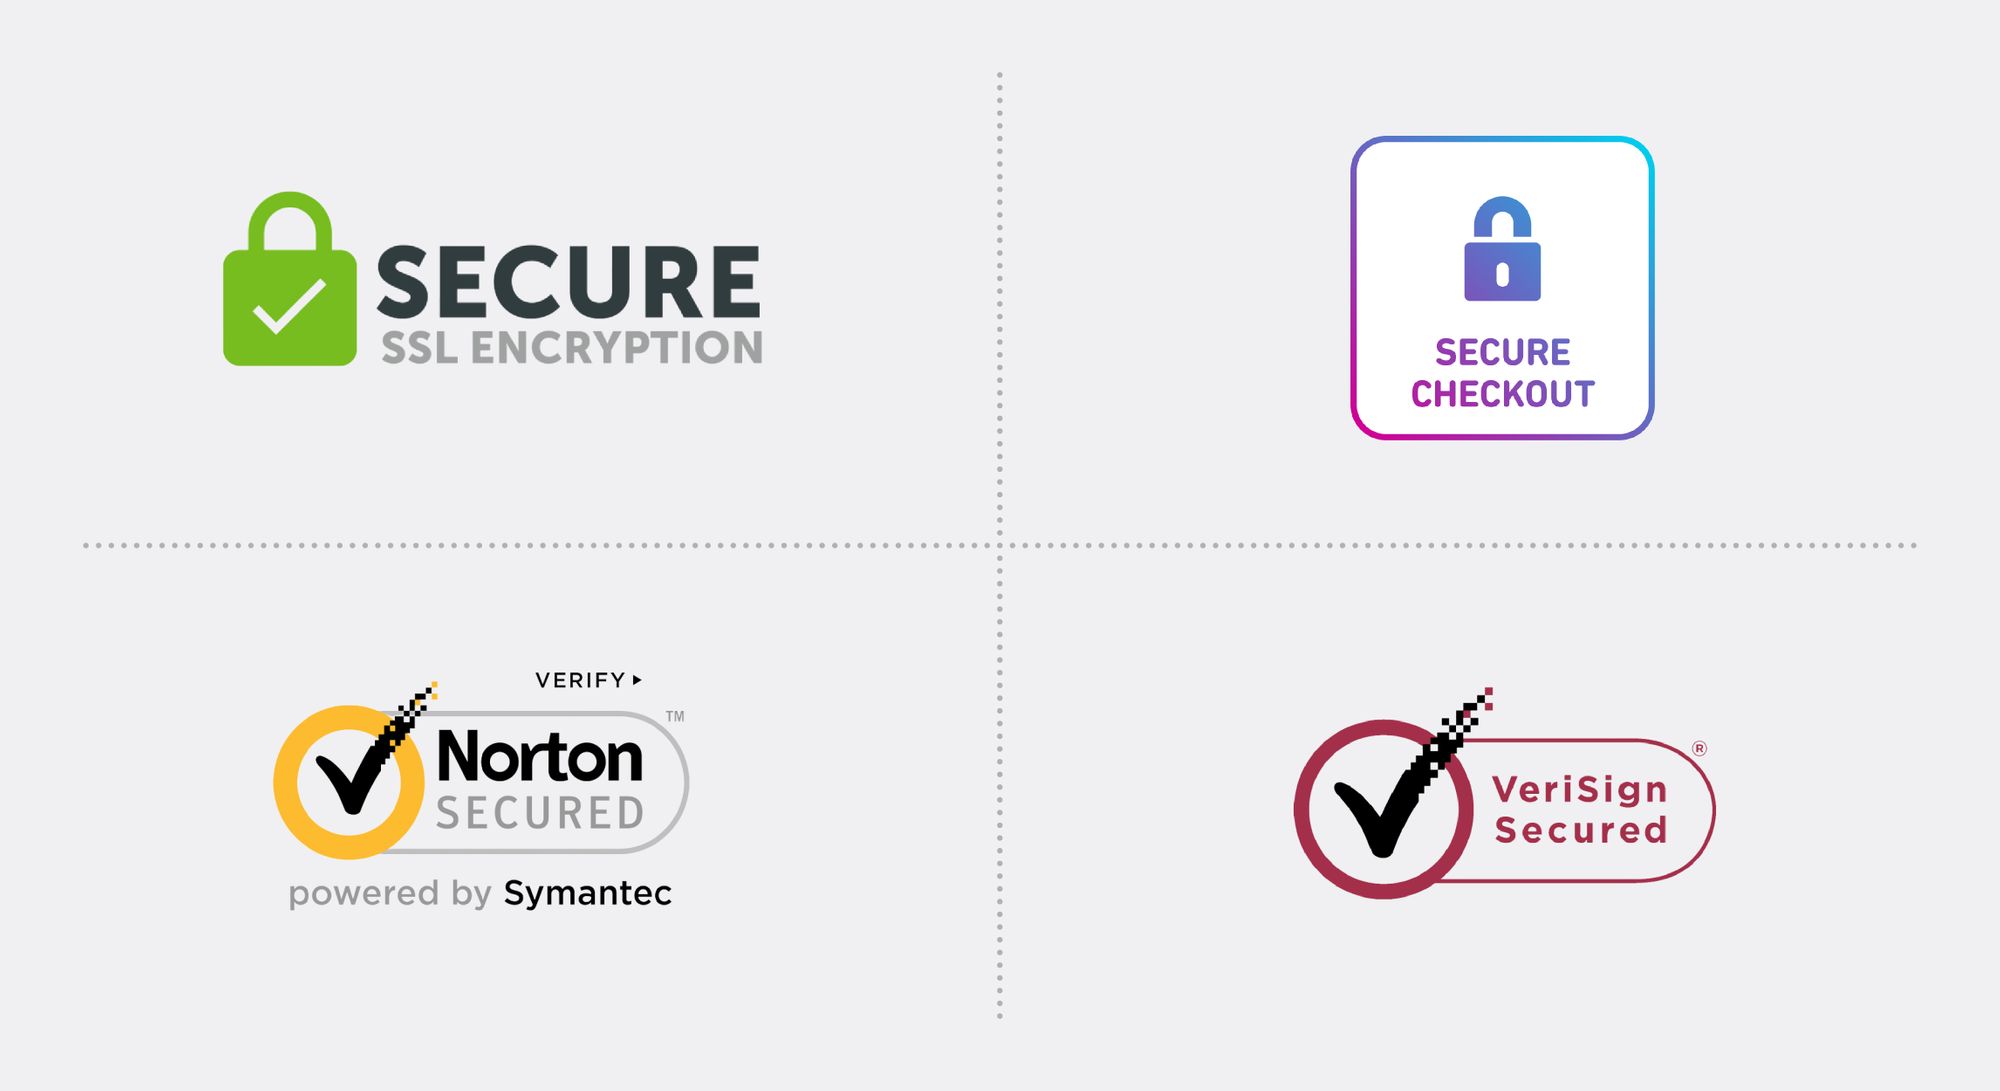 Examples of safe checkout trust badges: Secure SSL Encryption, Secure Checkout, Norton Secure, VeriSign Secured